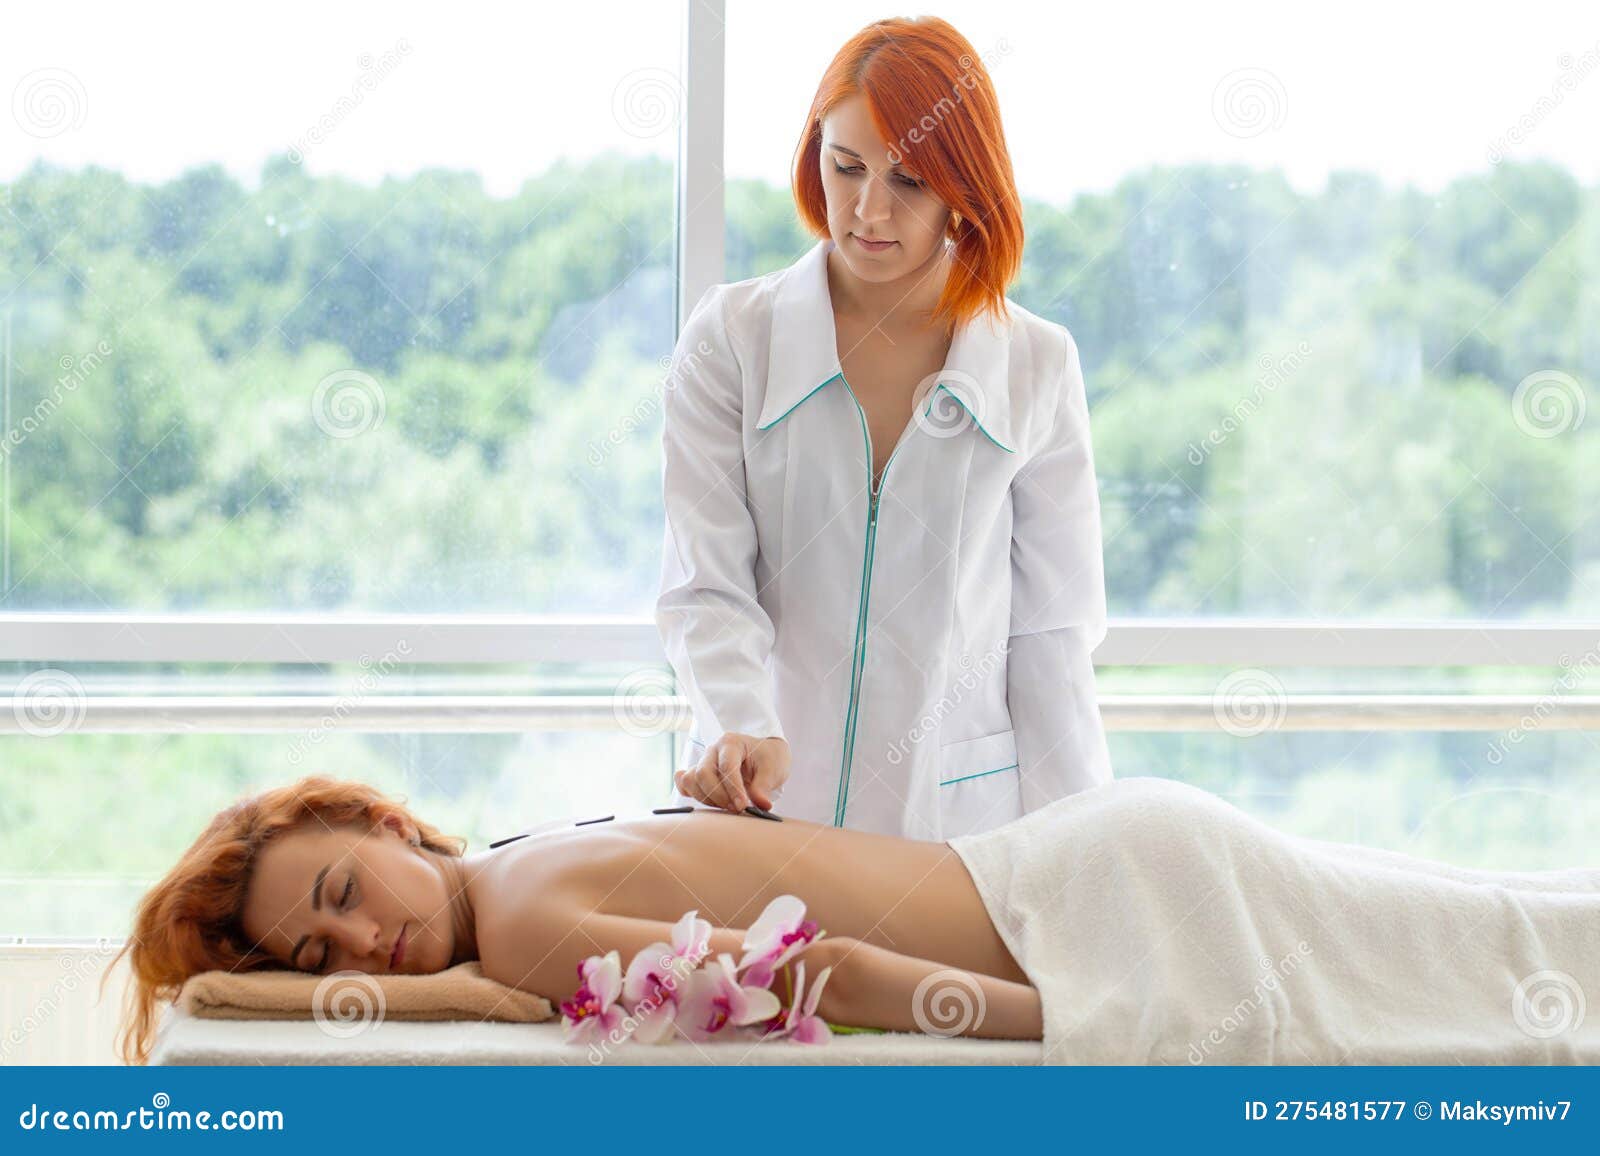 Young Woman Getting Hot Stone Massage In Spa Salon Stock Image Image Of Medicine Luxury